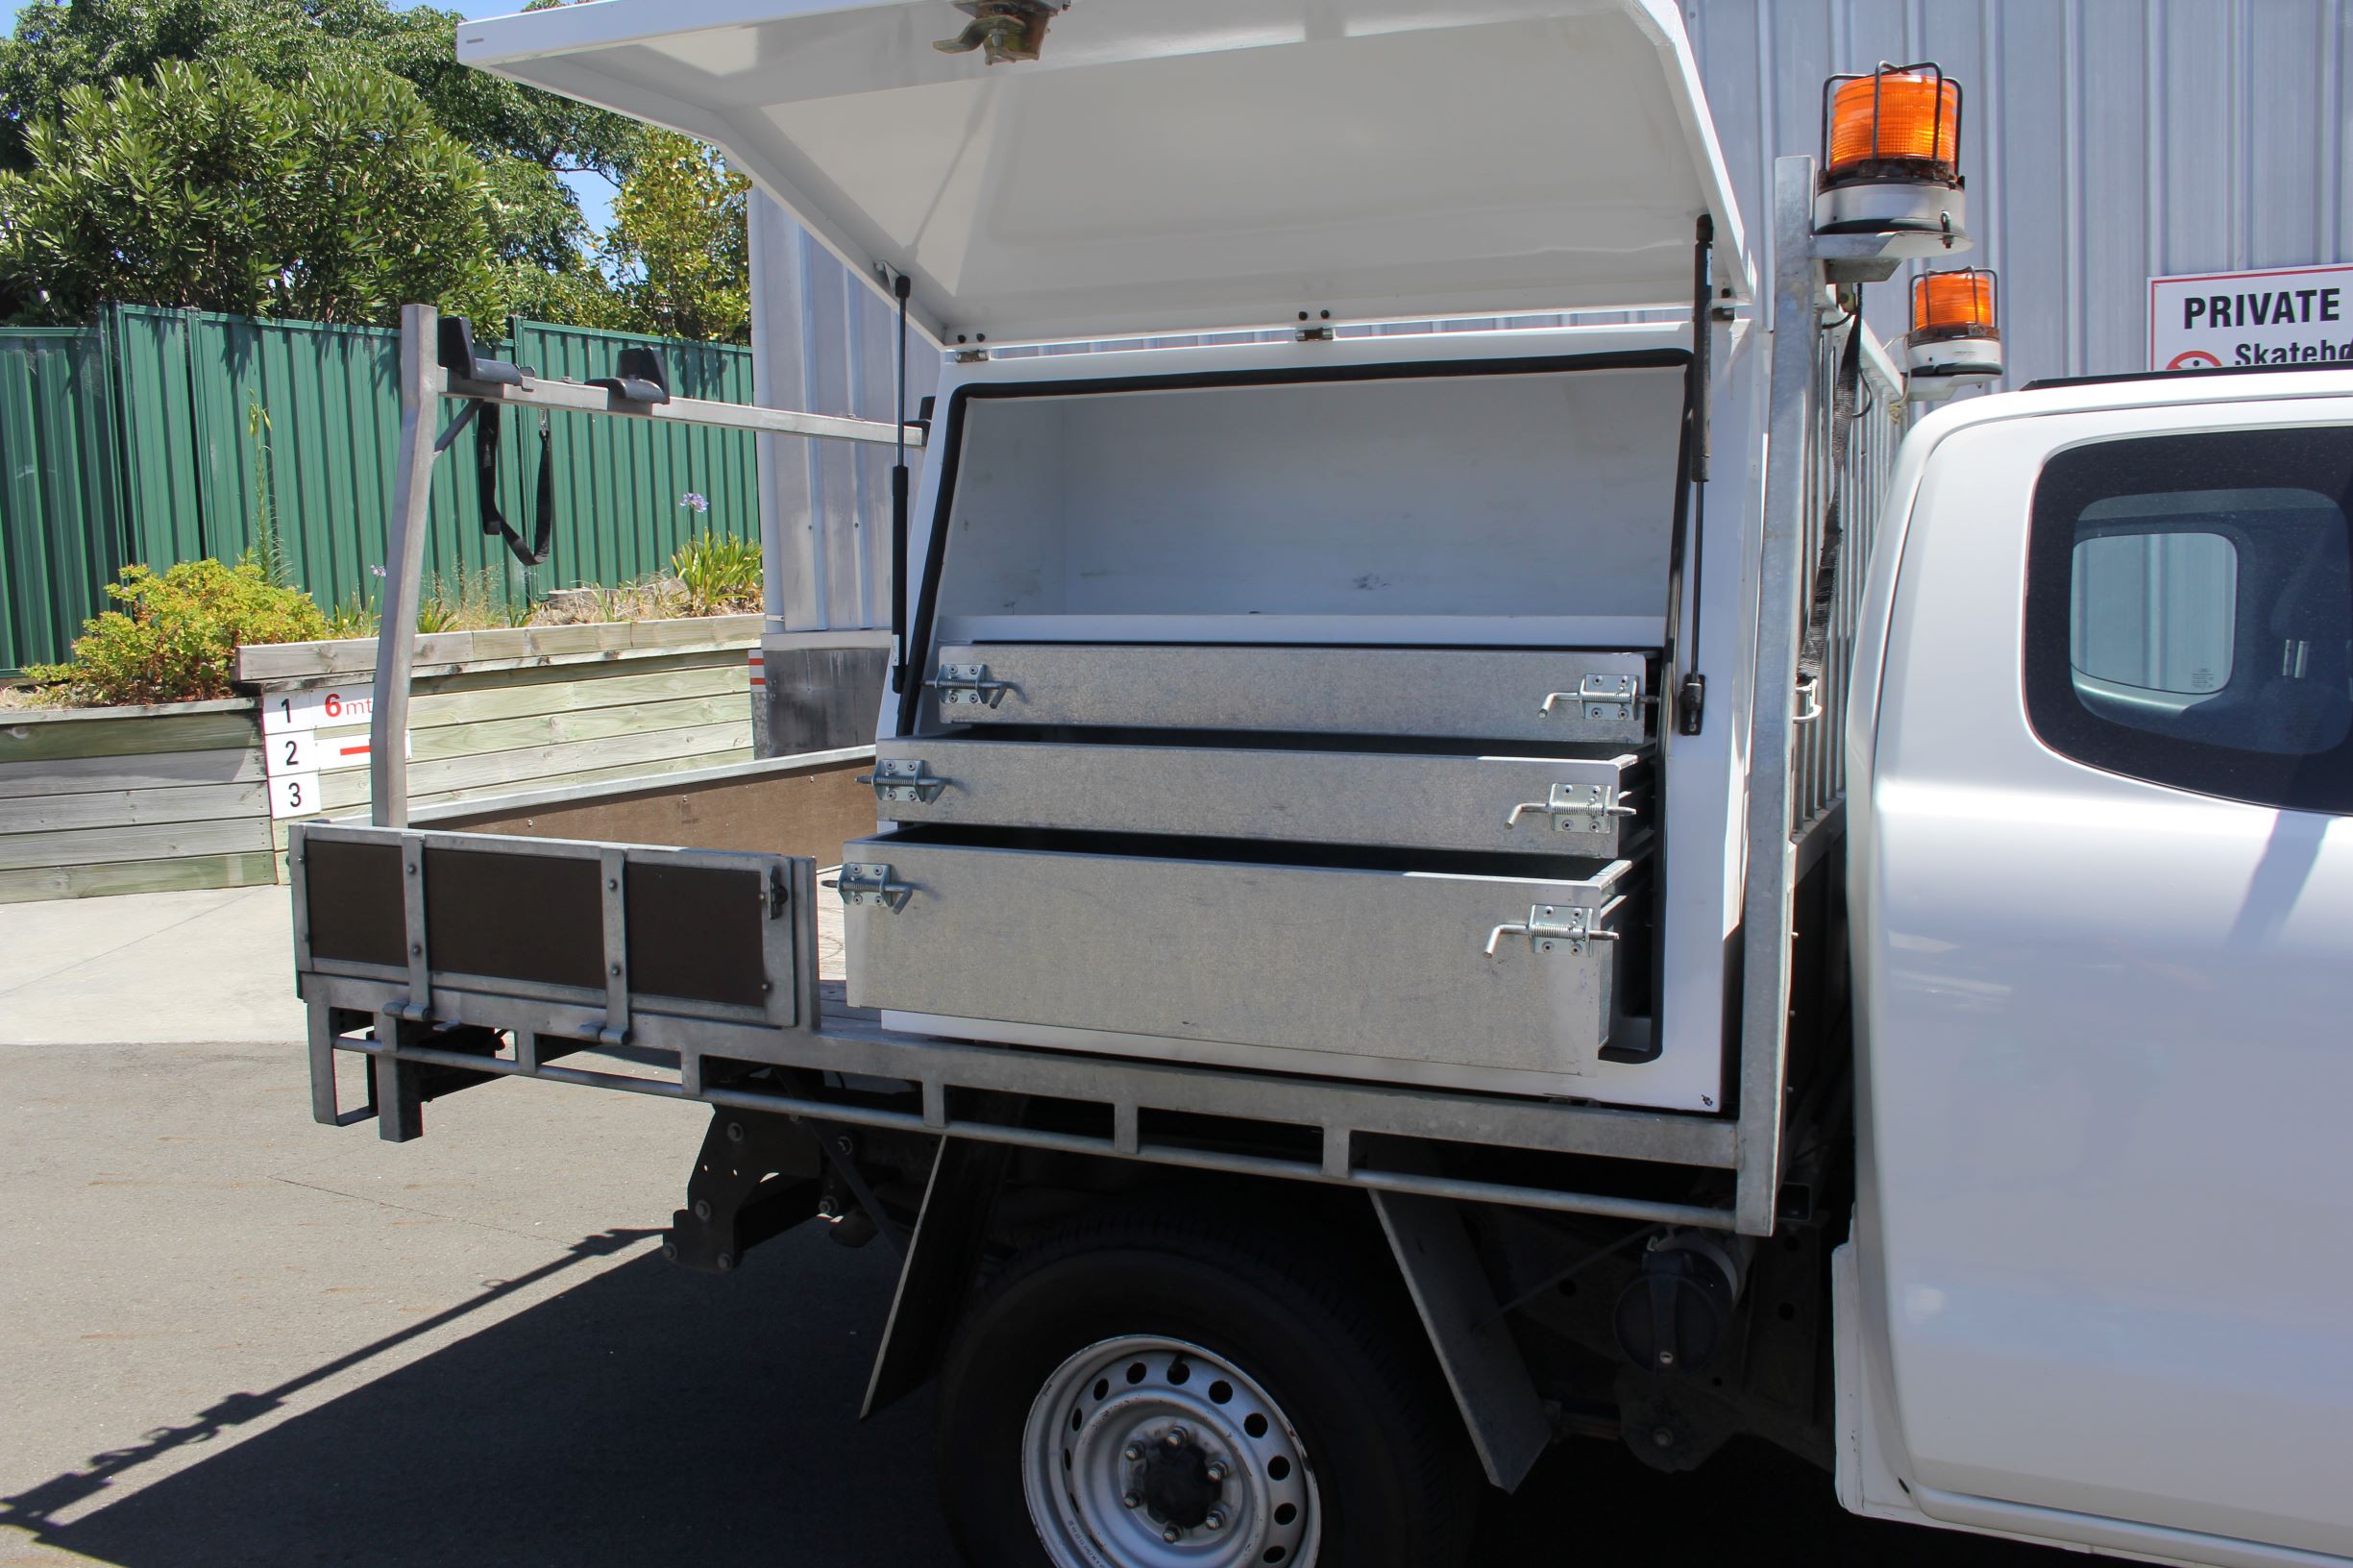 Ford Ranger 4WD BOX BODY 2014 for sale in Auckland